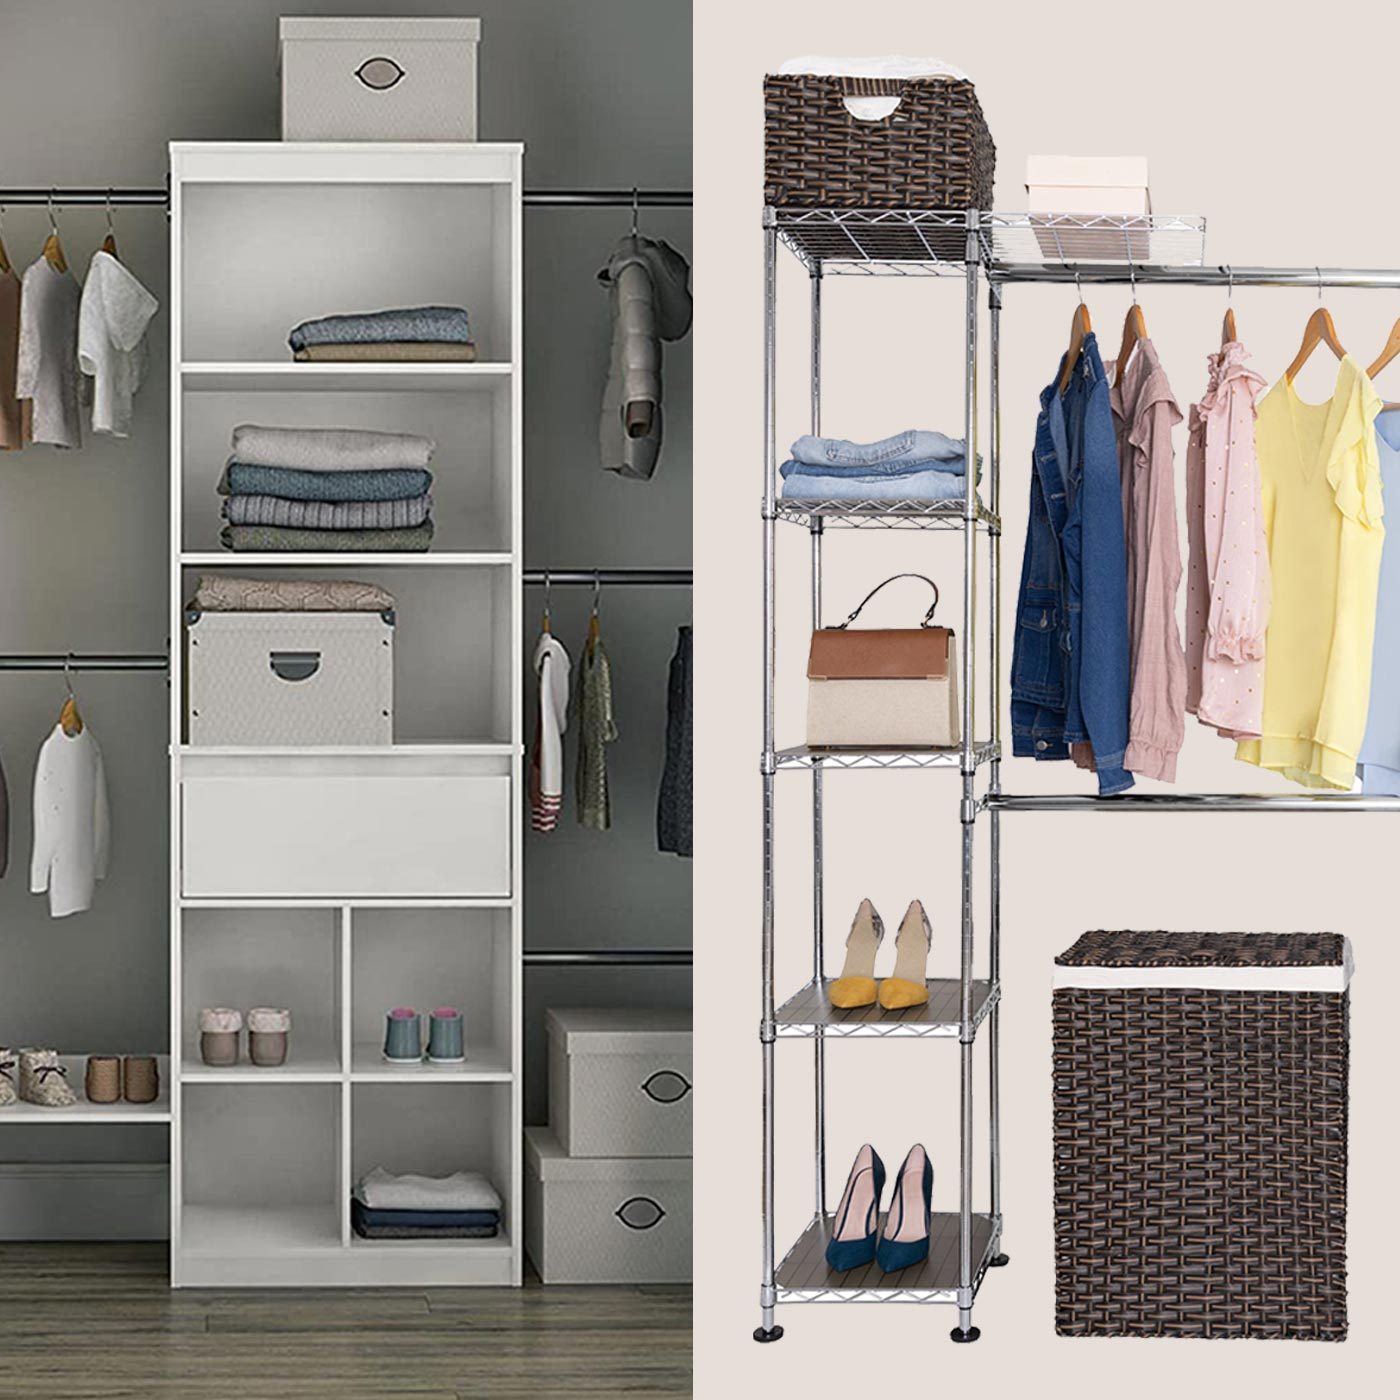 https://www.rd.com/wp-content/uploads/2021/04/8-Best-Closet-Systems-to-Organize-Your-Space-in-2023_FT_via-amazon.com_-1.jpg